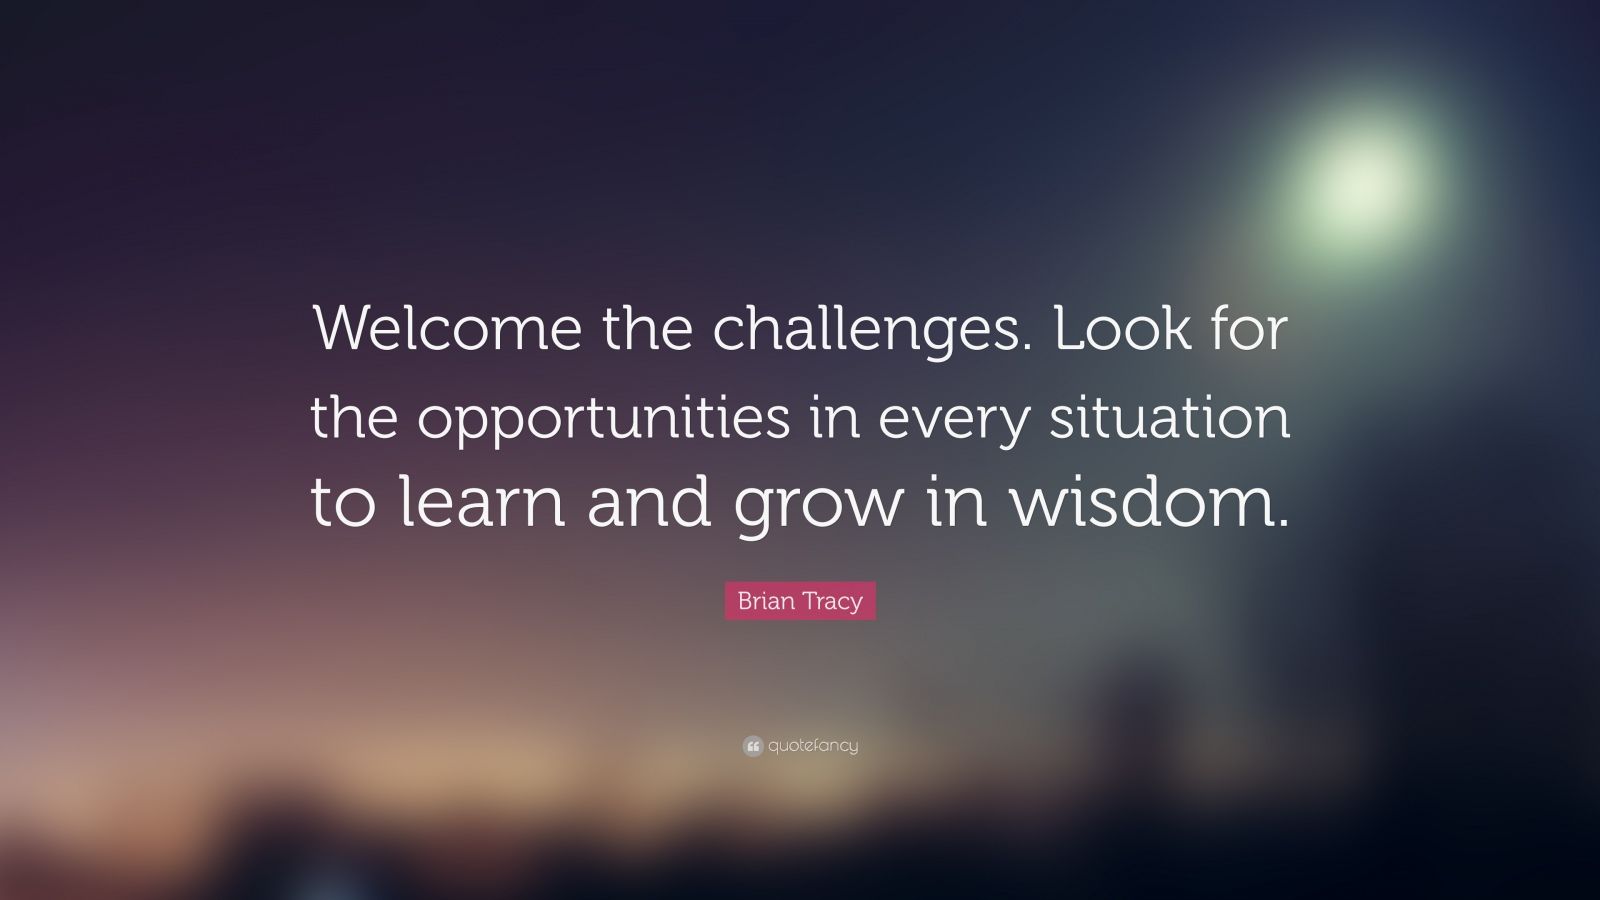 Brian Tracy Quote: “Welcome the challenges. Look for the opportunities